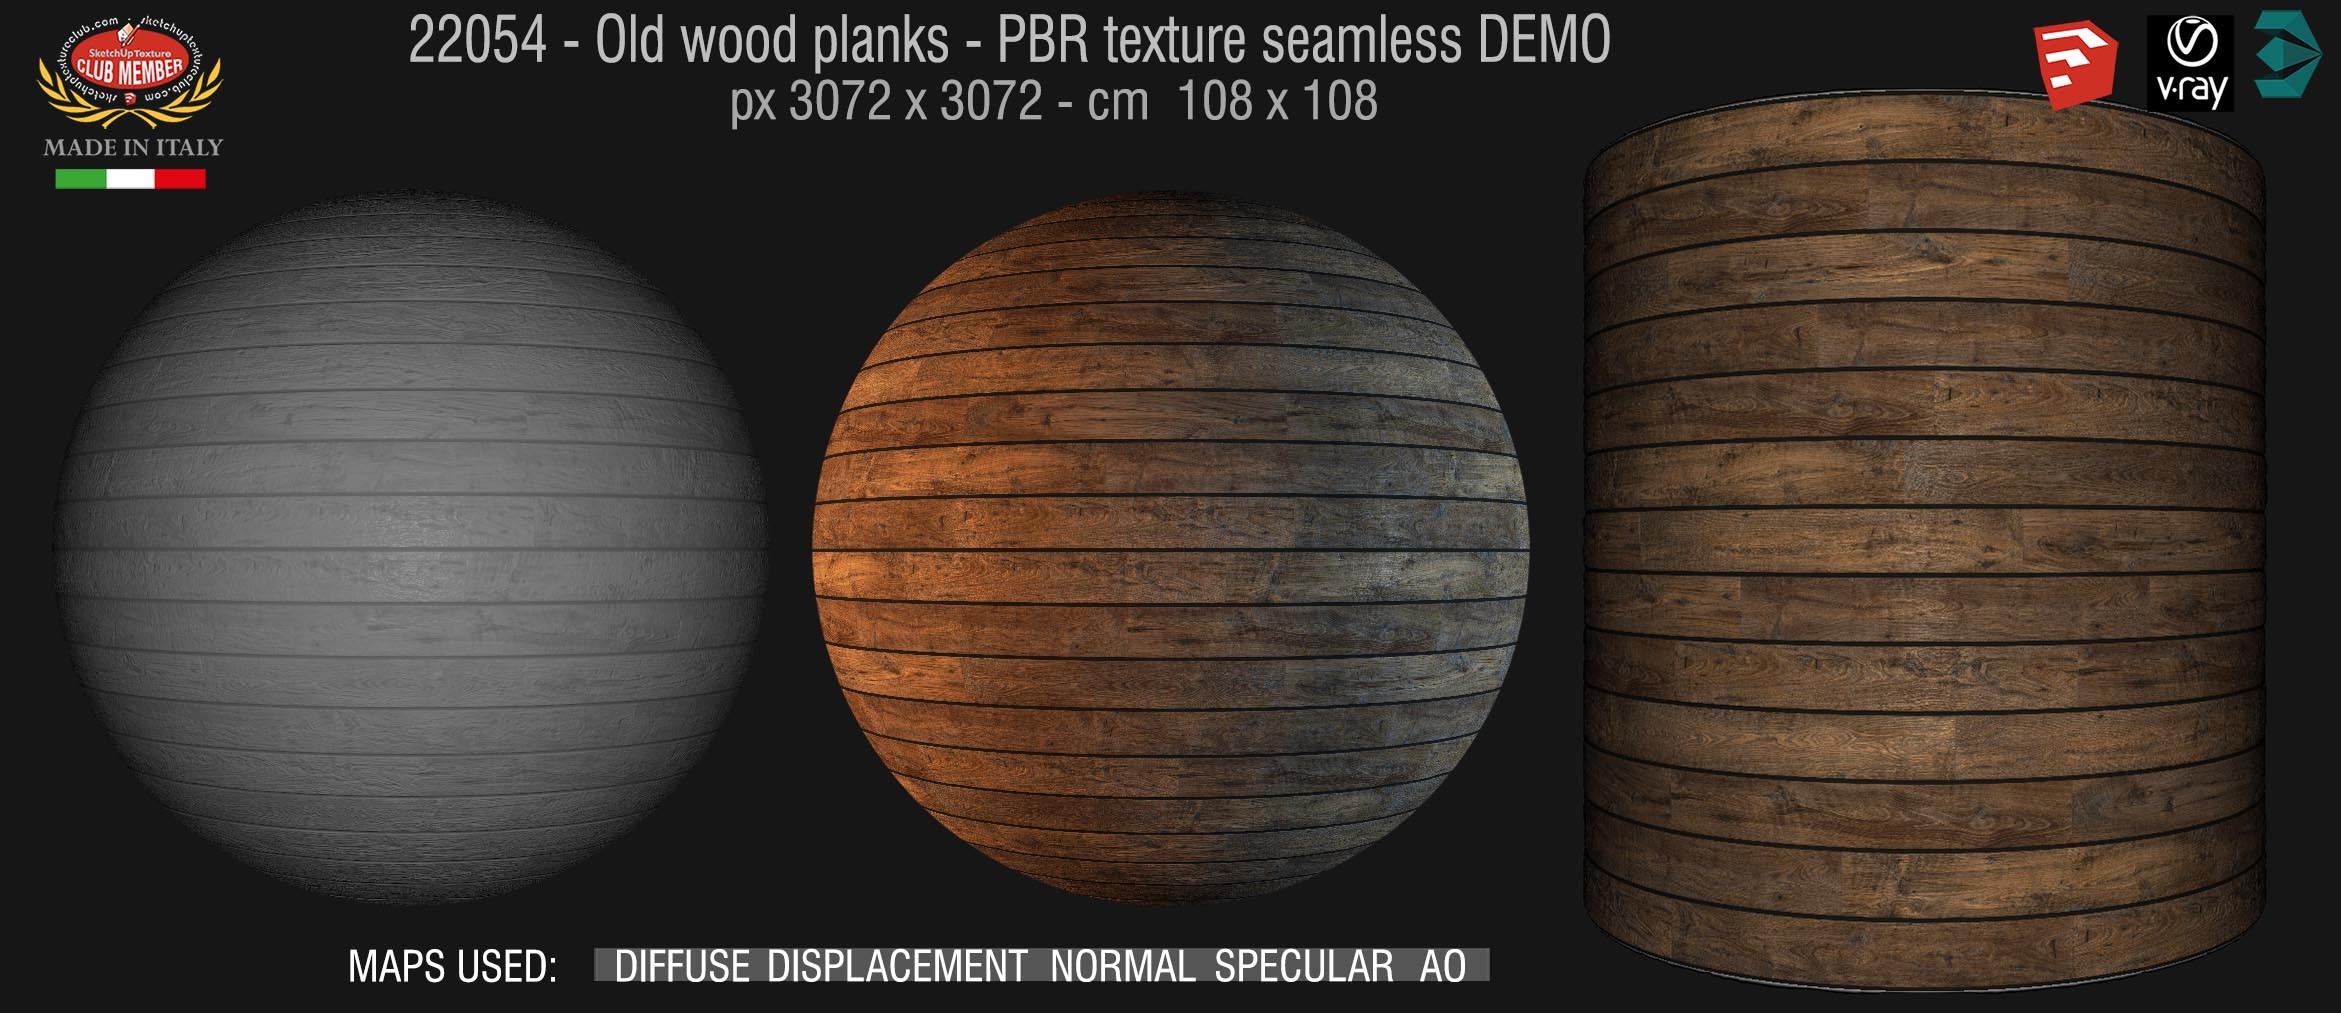 22054 Old wood planks PBR texture seamless DEMO